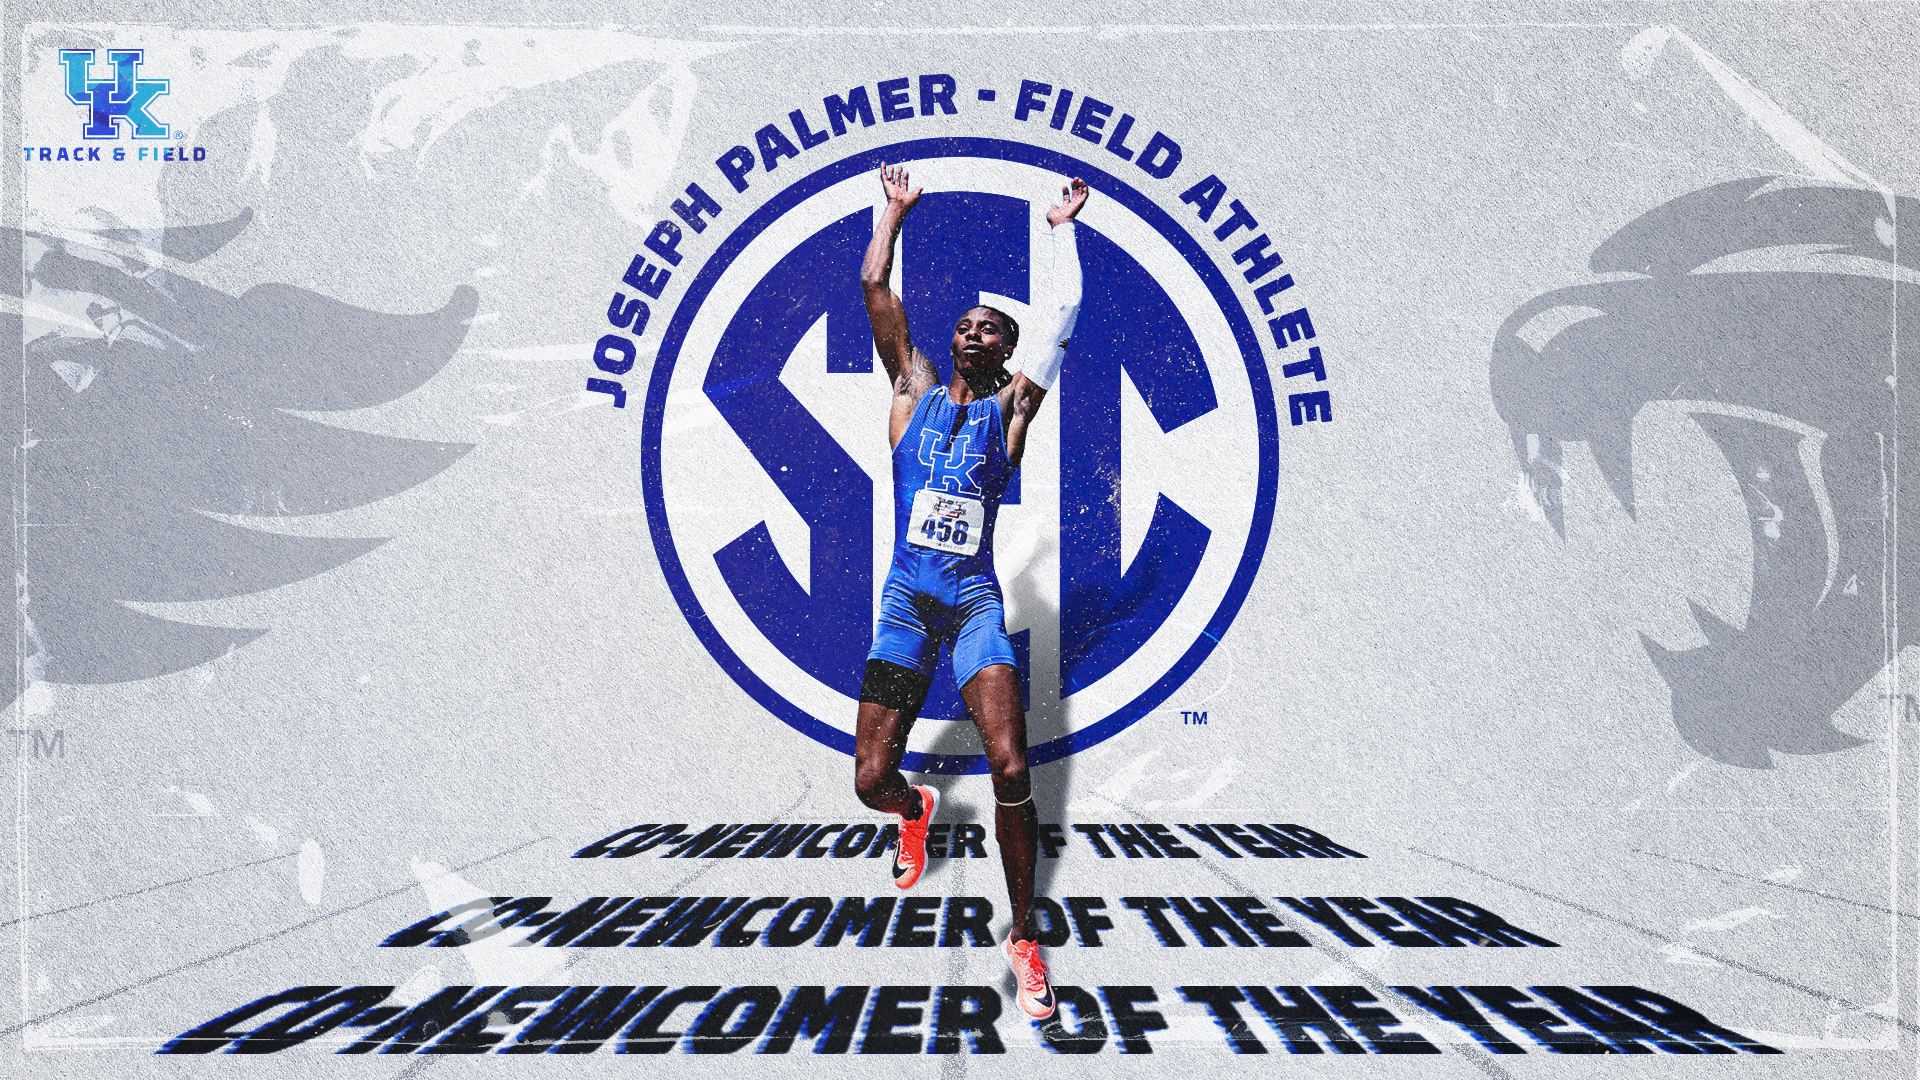 Joseph Palmer Named SEC Field Athlete Co-Newcomer of the Year